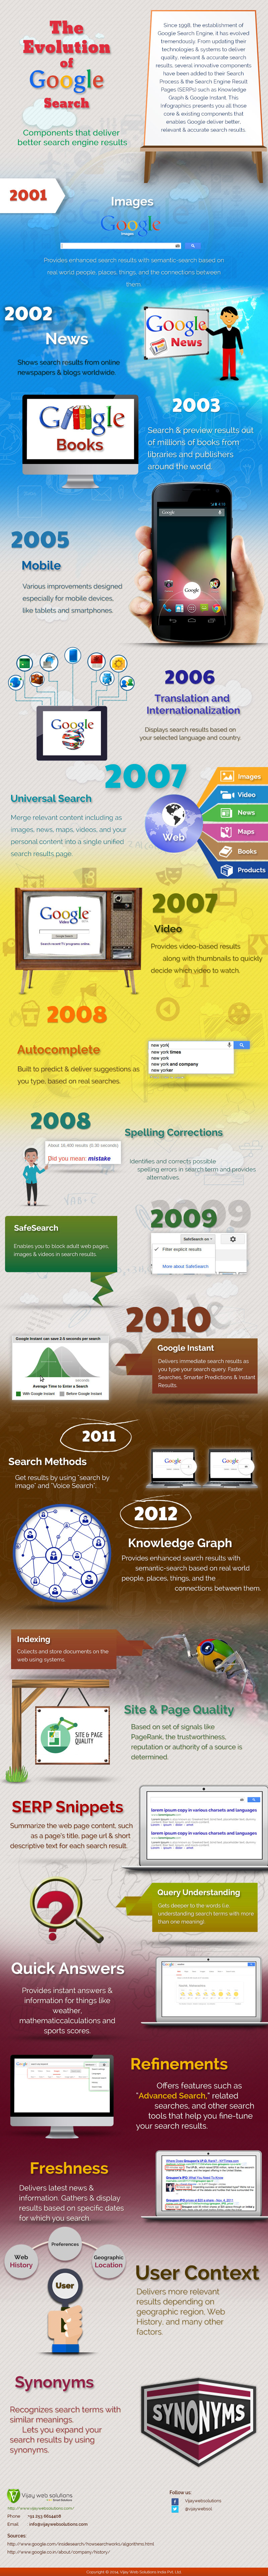 The Evolution of Google Search